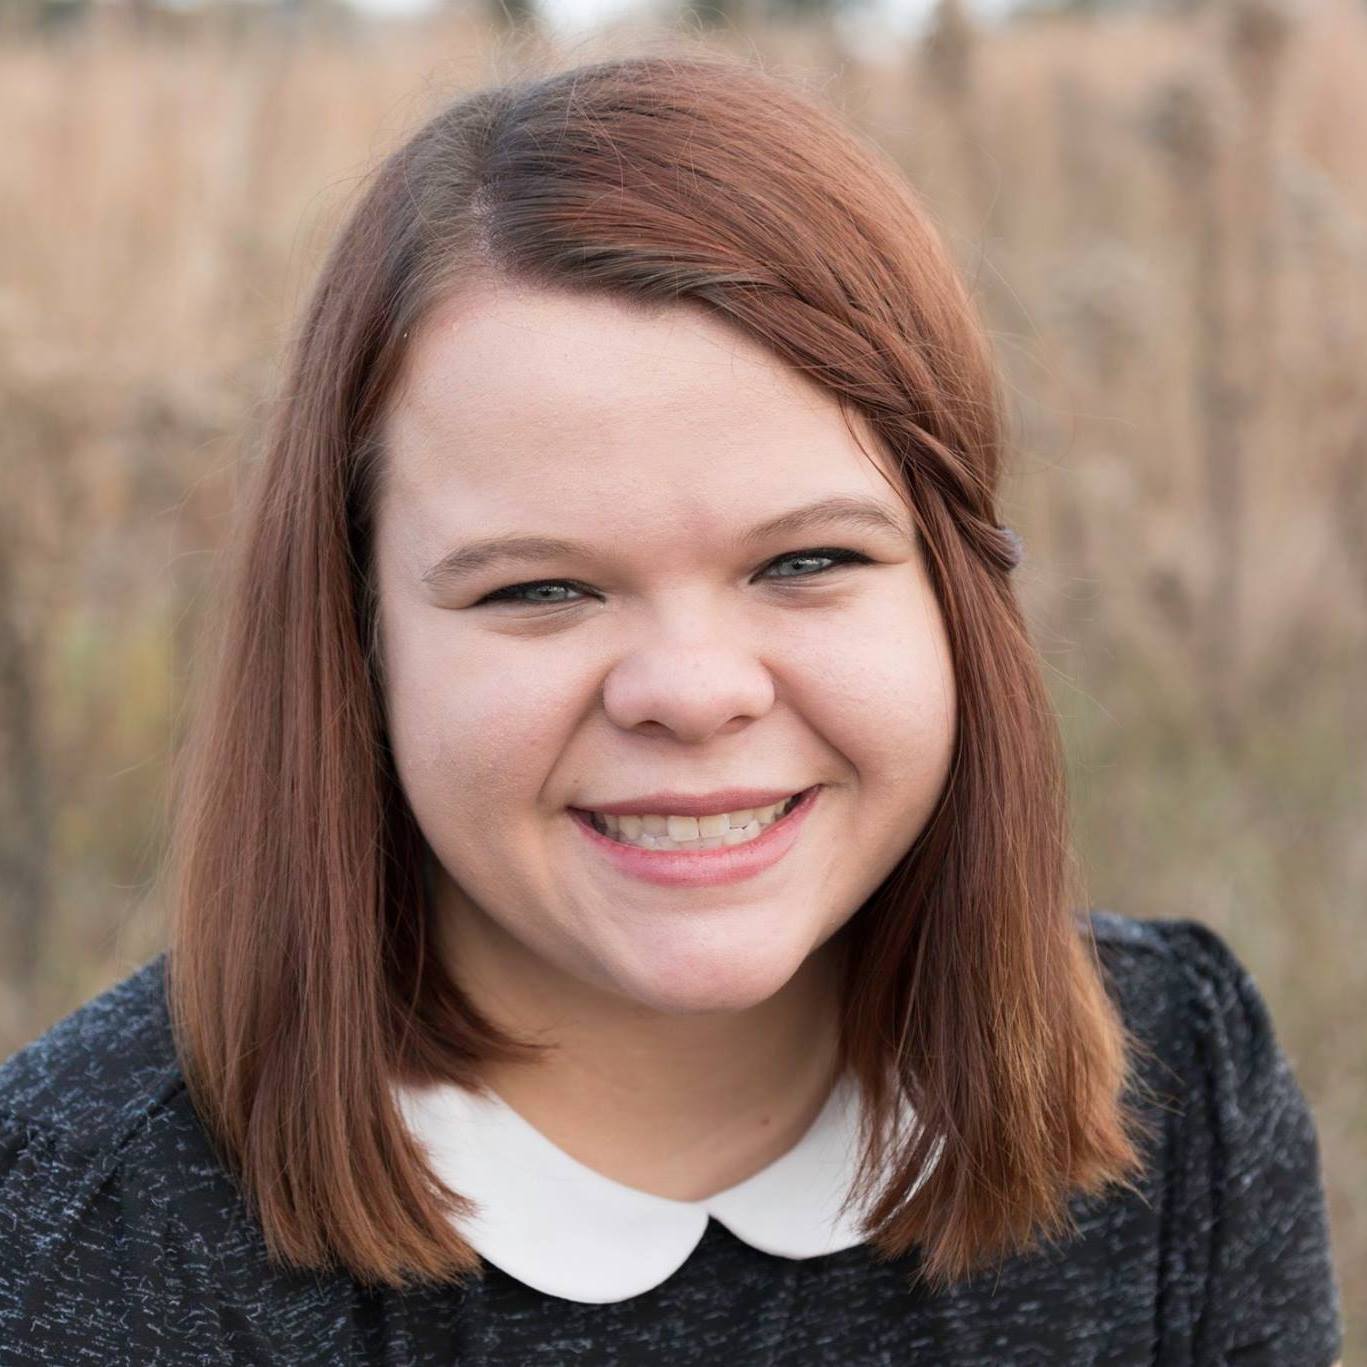 Karley Powell received the 2018 Ruth Edelman Public Relations Student Society of America Award.